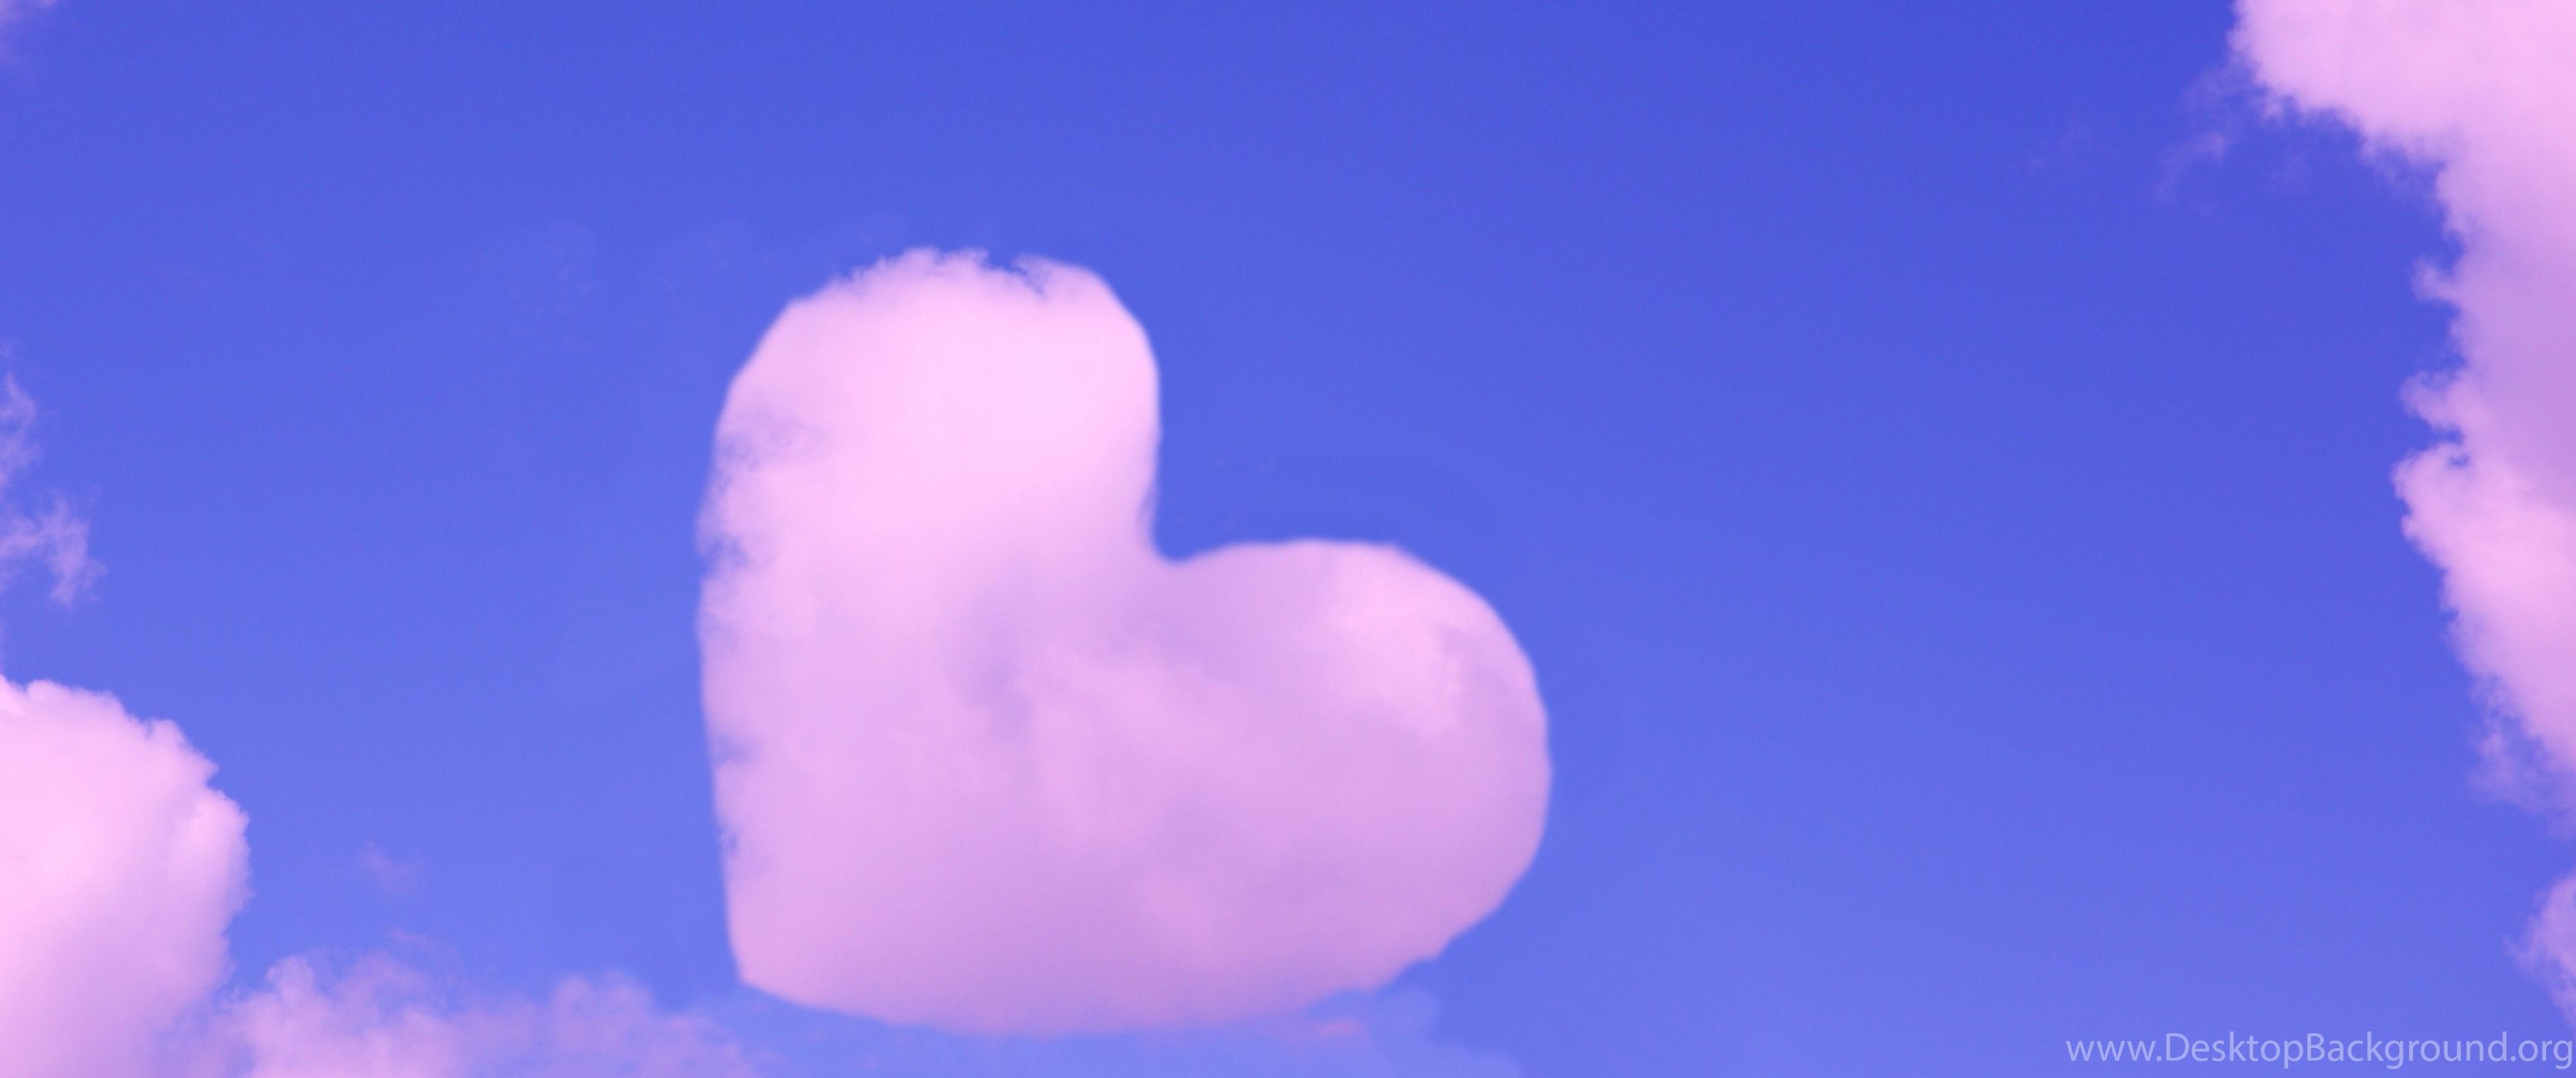 Sky, Pink Clouds Wallpaper And Image Wallpaper, Picture, Photo